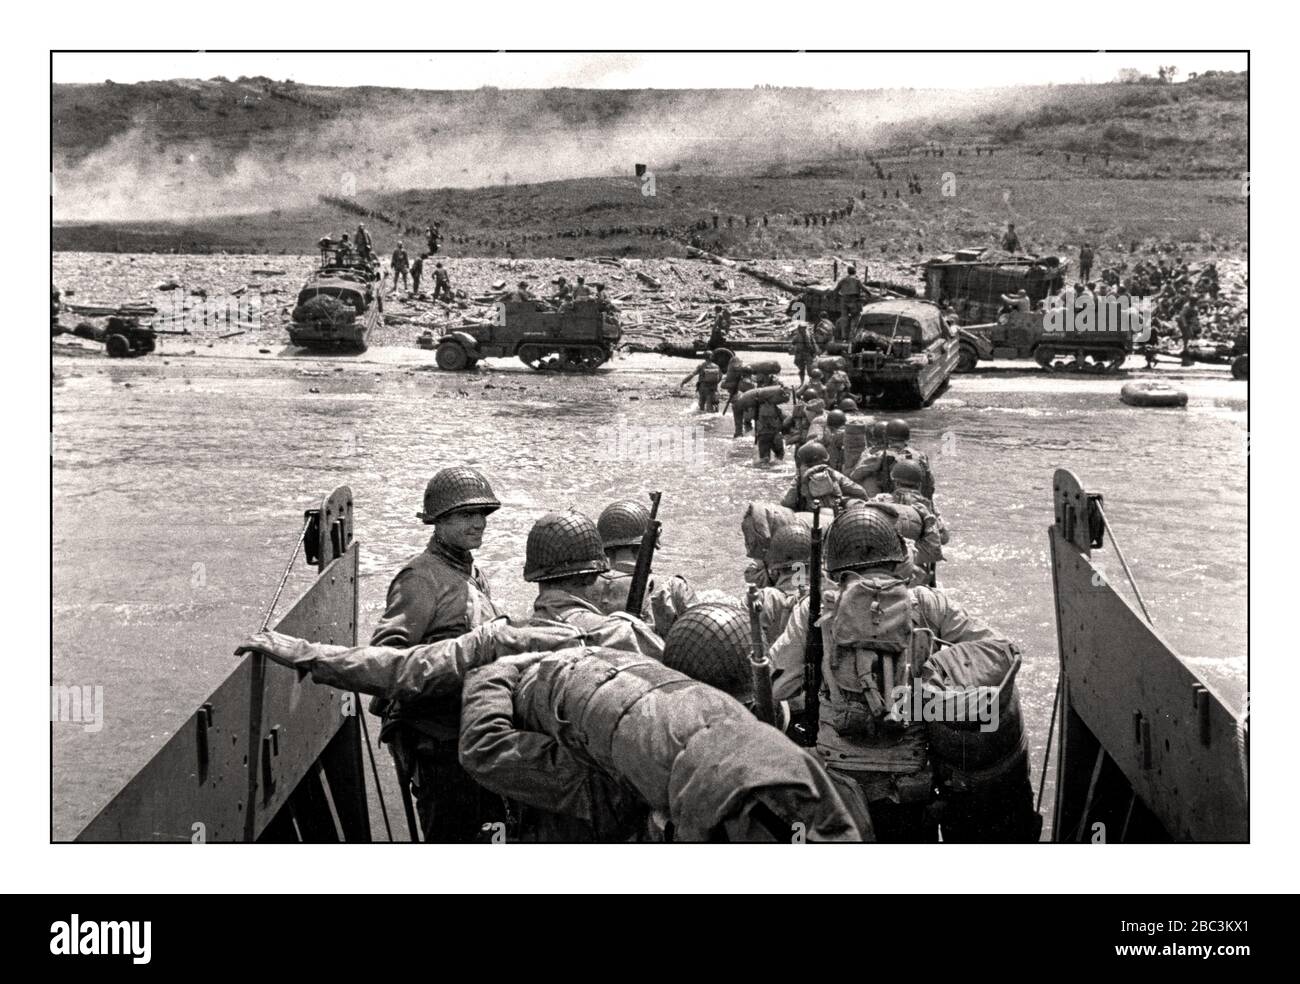 Omaha Beach landng craft D day WW2 American GI Troops disembark D-Day WW2 JUNE 6th 1944 American GI Soldiers group in a landing craft beach under fire by Nazi Wehrmacht gun emplacements at Normandy France during the Allied invasion, June 6, 1944. Along a 50-mile stretch of coastline in northern France, more than 160,000 Allied troops stormed Utah Beach and four other beaches that day to gain a foothold in continental Nazi Europe. By the end of the D-Day invasion, more than 9,000 of those Allied troops were either dead or wounded -- the majority of them Americans. World War II Stock Photo